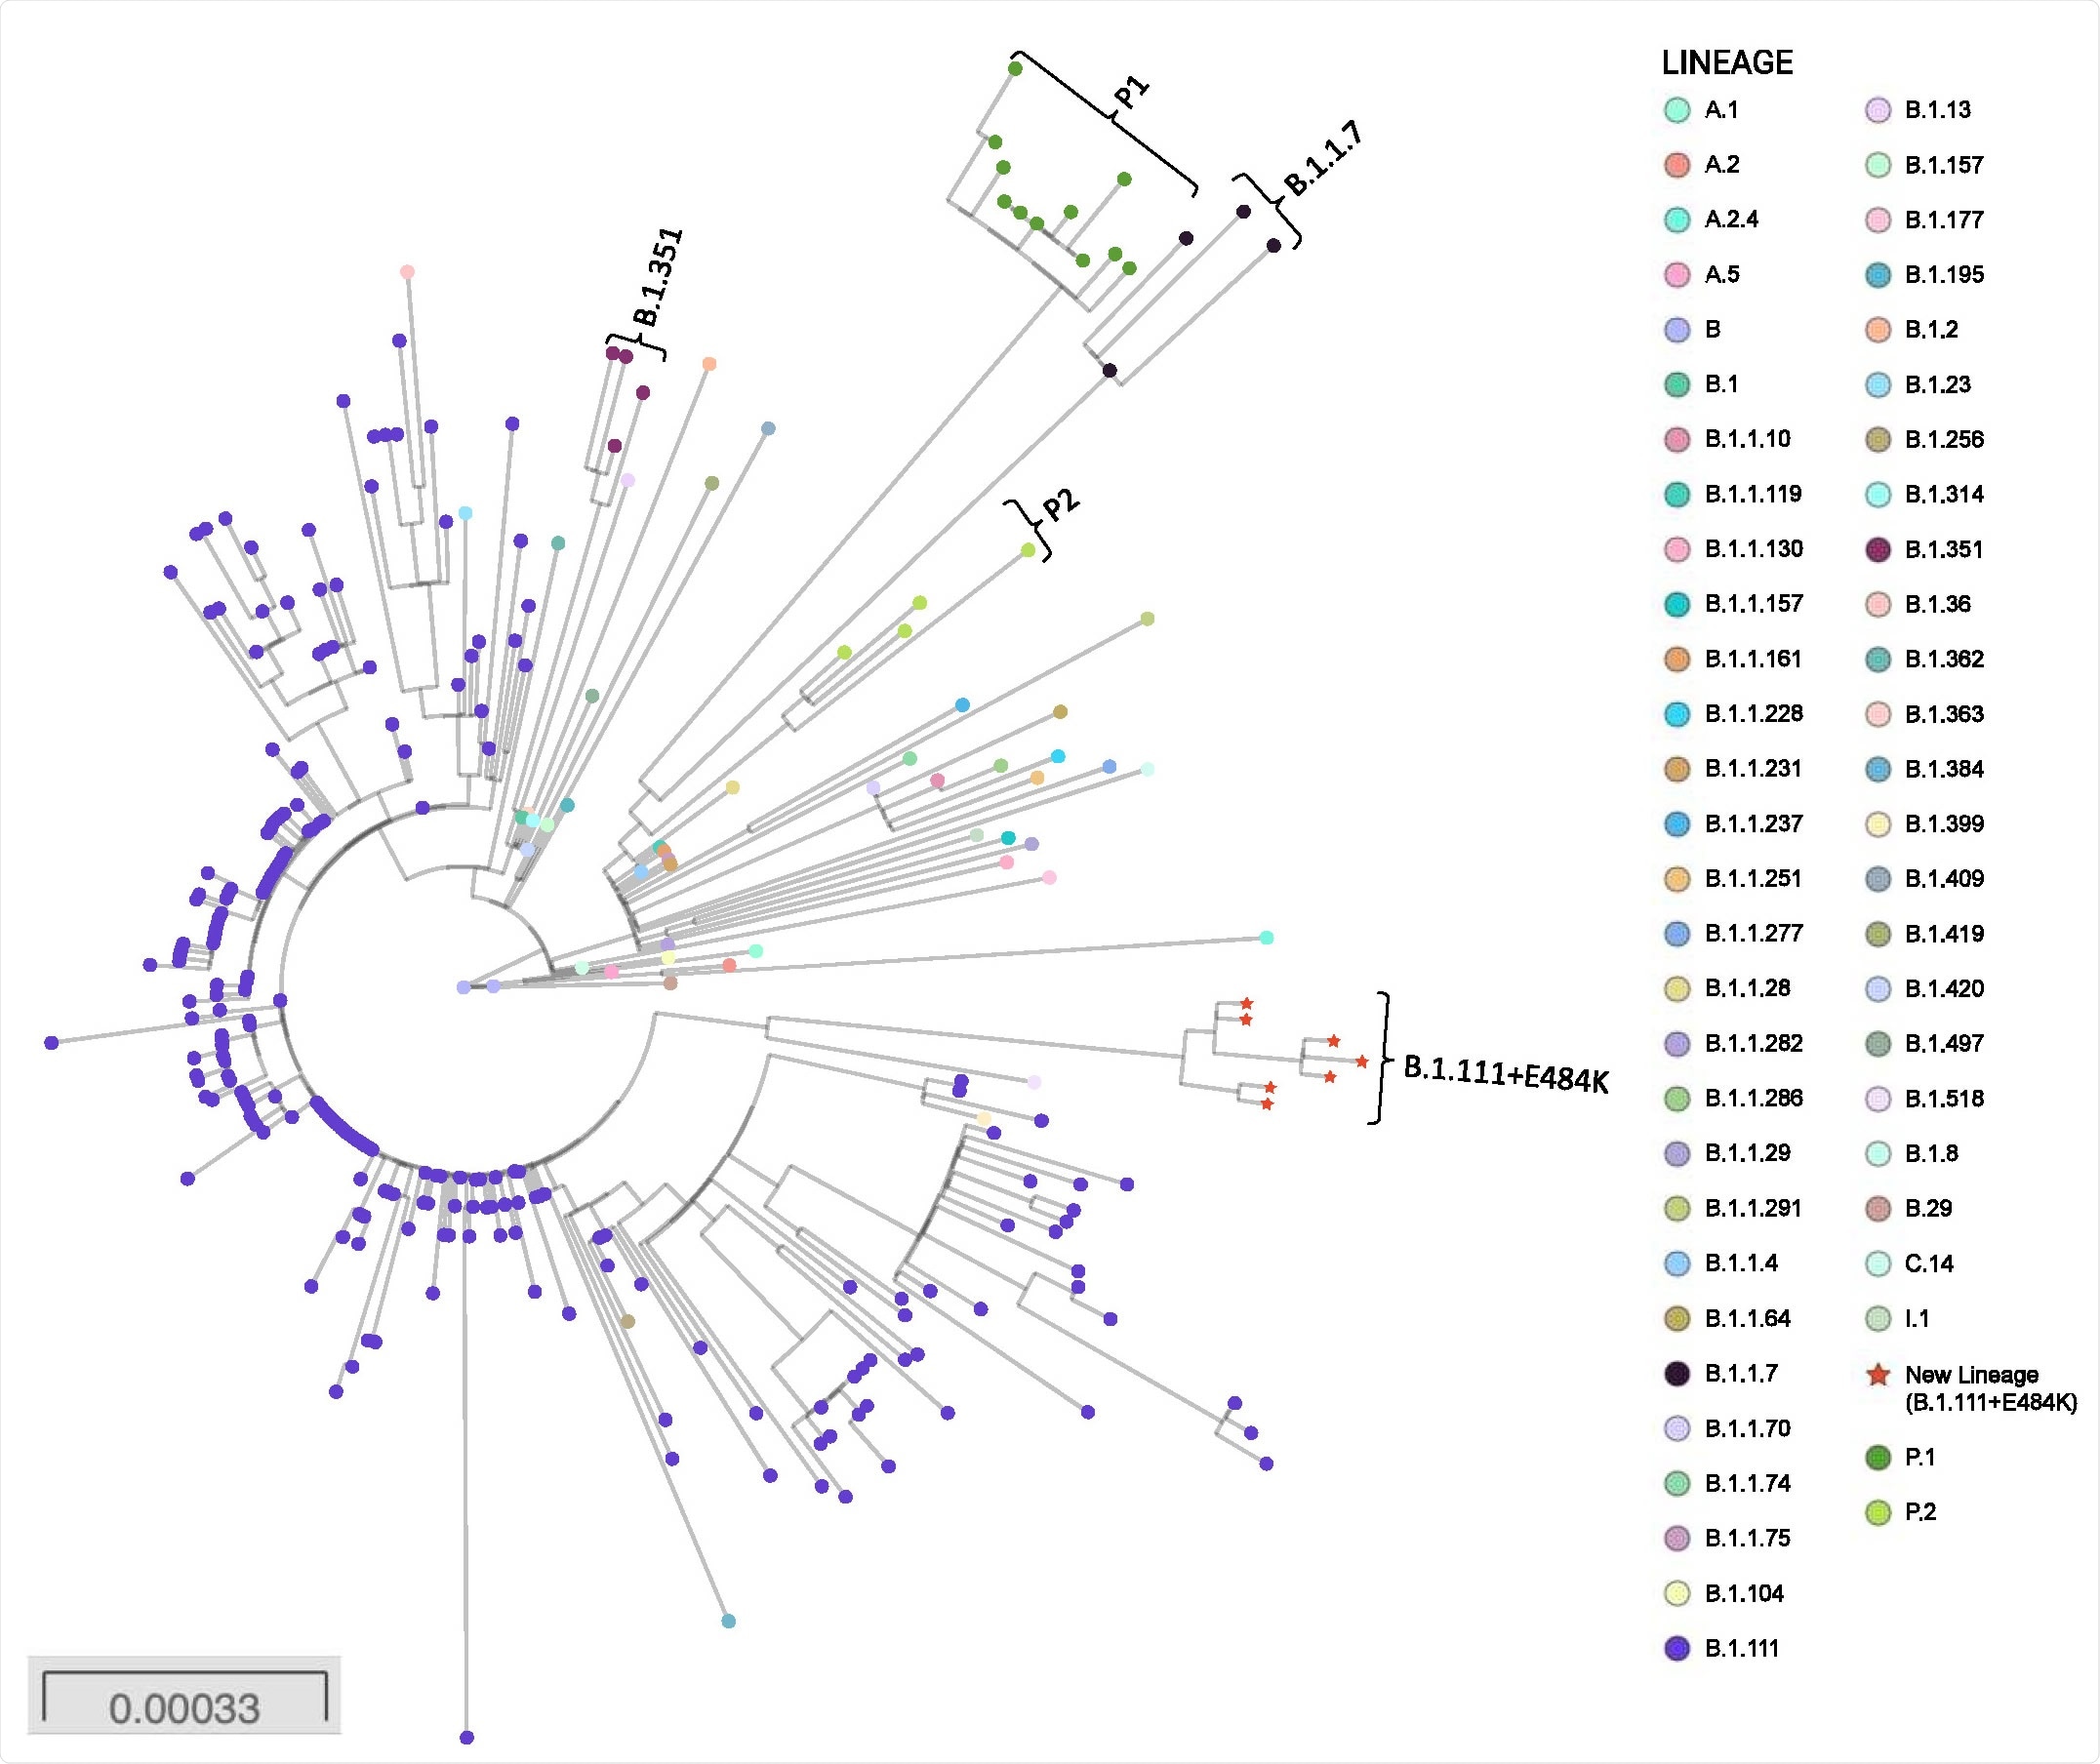 Phylogenetic tree of the new lineage of SARS-CoV-2 emerging from B.1.111 lineage. The tree was reconstructed by maximum likelihood with the estimated GTR+F+I nucleotide substitution model for the dataset of 304 full-length genomes, representative of the principal recently emerging lineages. The interactive tree can be accessed in the following link: https://microreact.org/project/nFBT2K1JdjcMuEPH7u32Ar/6d9eb0c0. Red stars represent the sequences belonging to the new lineage.